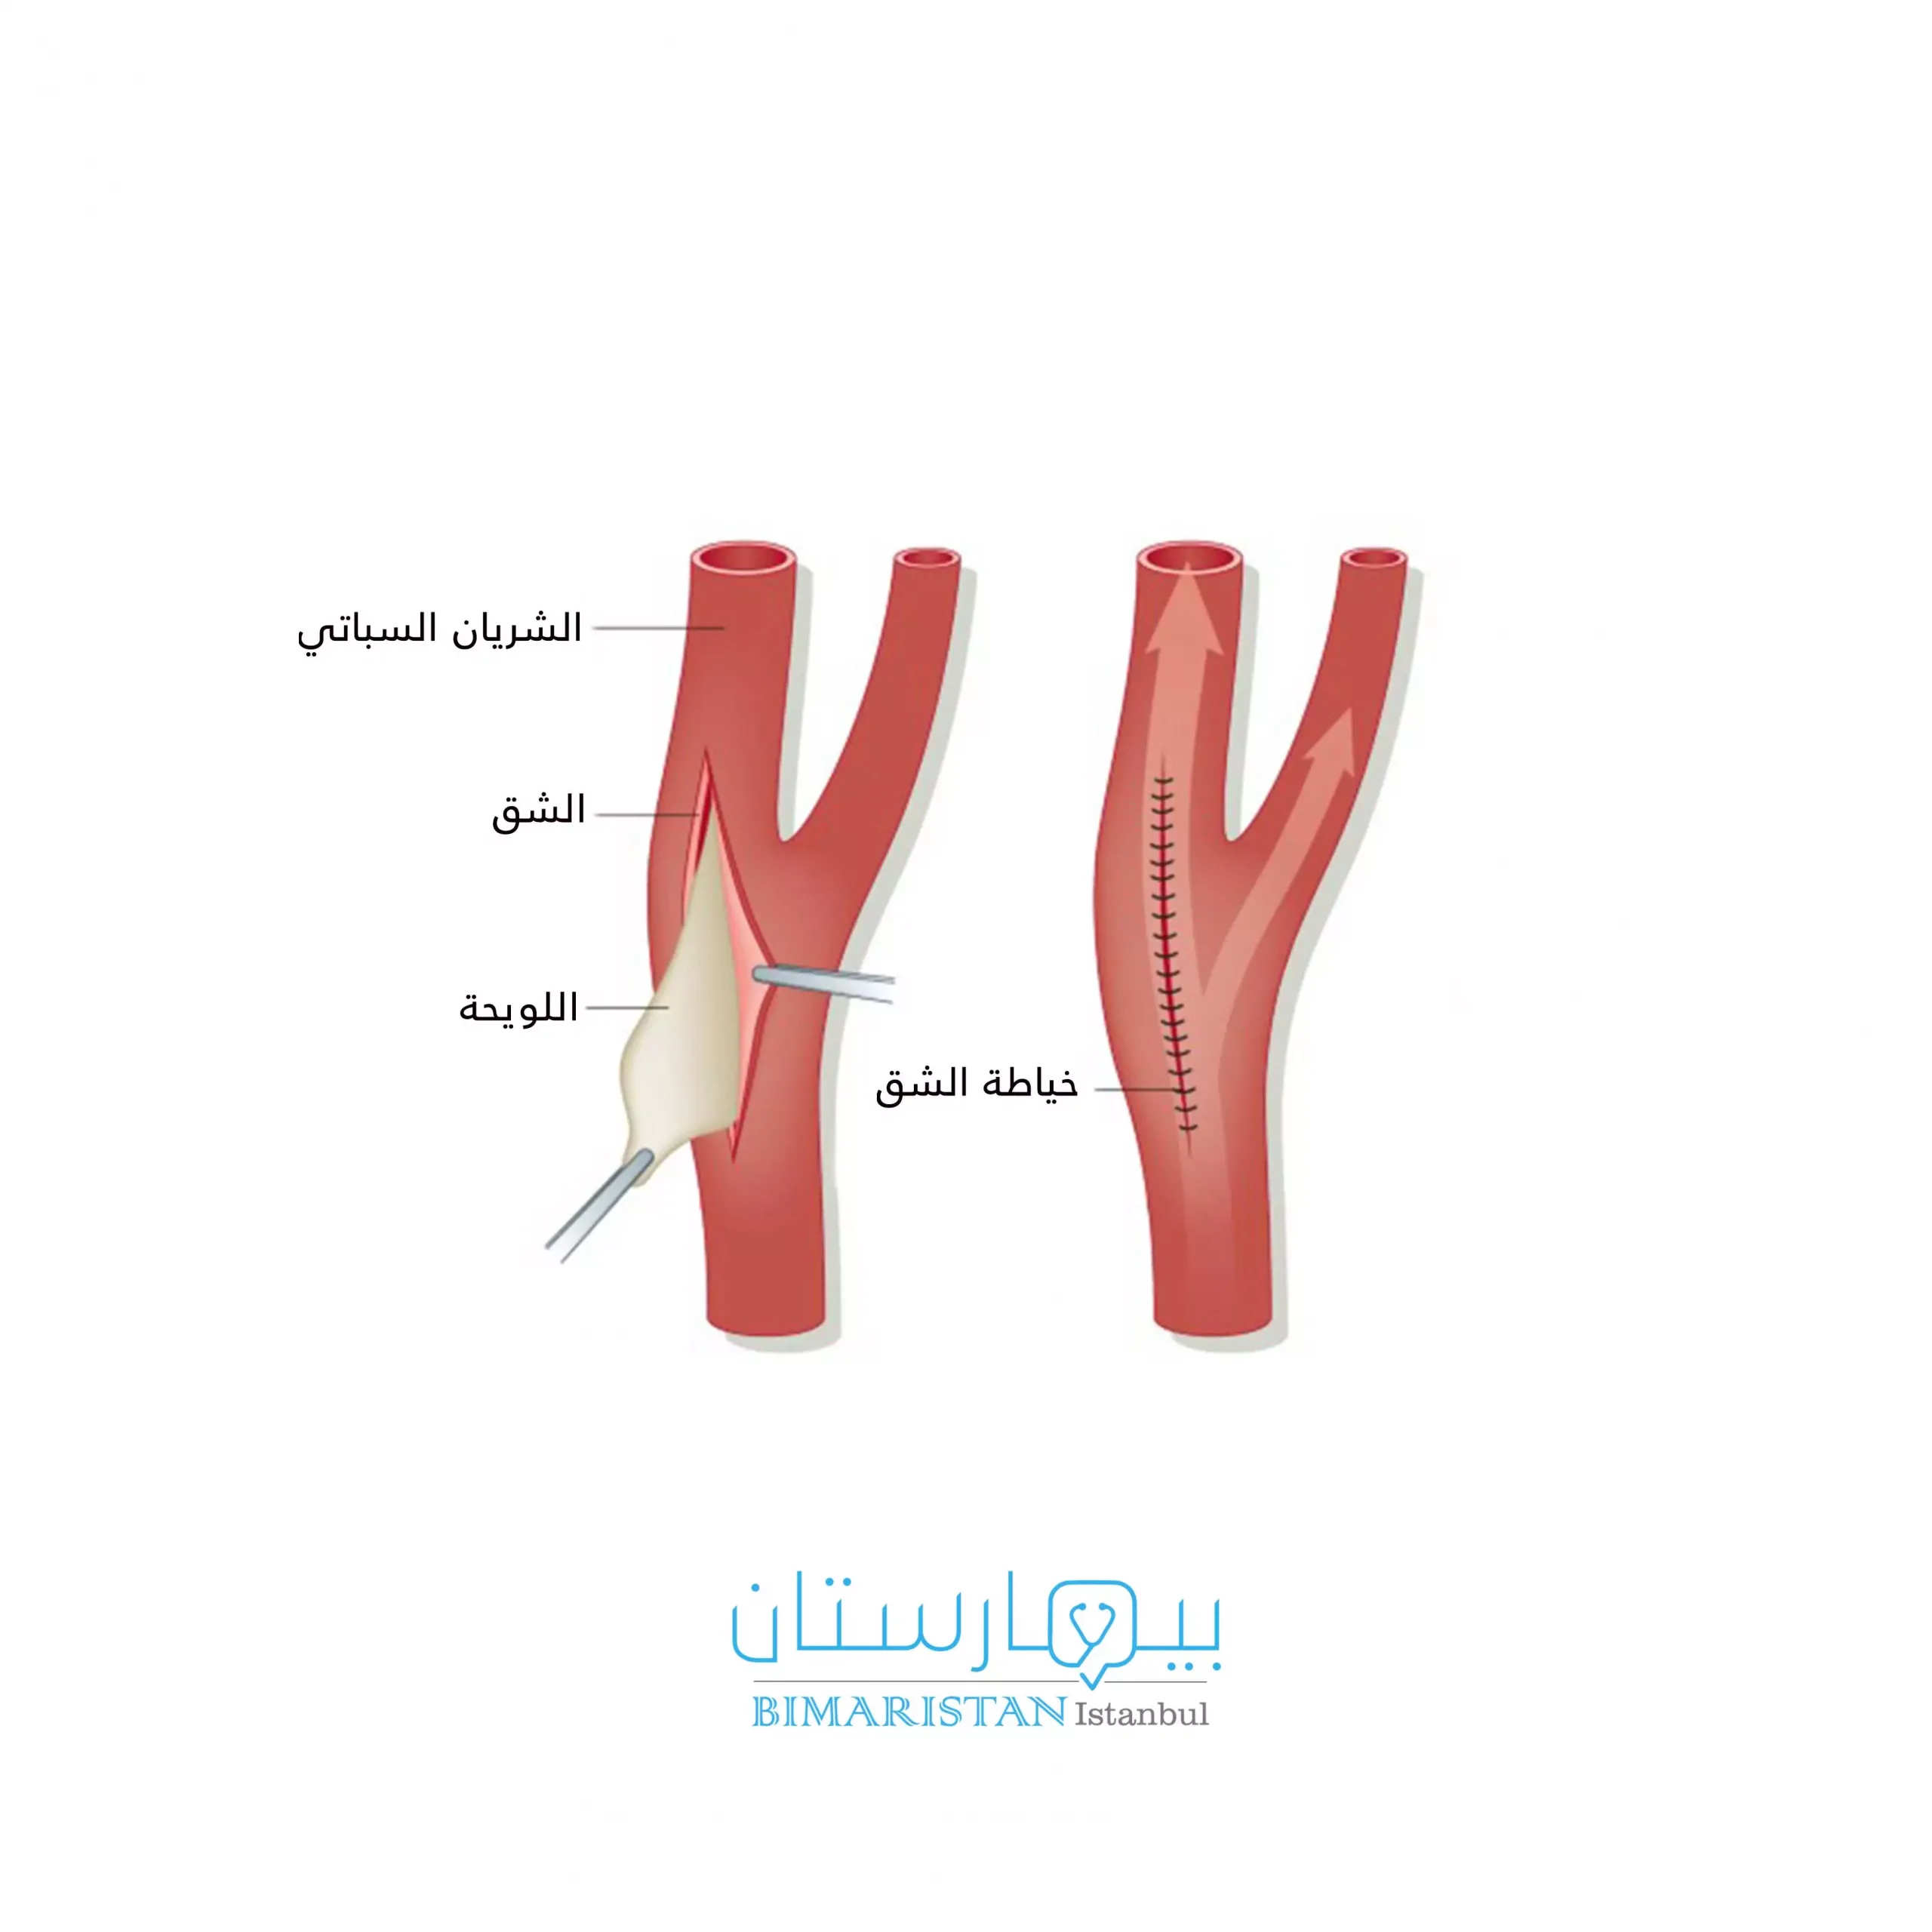 A longitudinal incision is made in the carotid artery, and the atherosclerotic plaque is removed from the endoarteritis